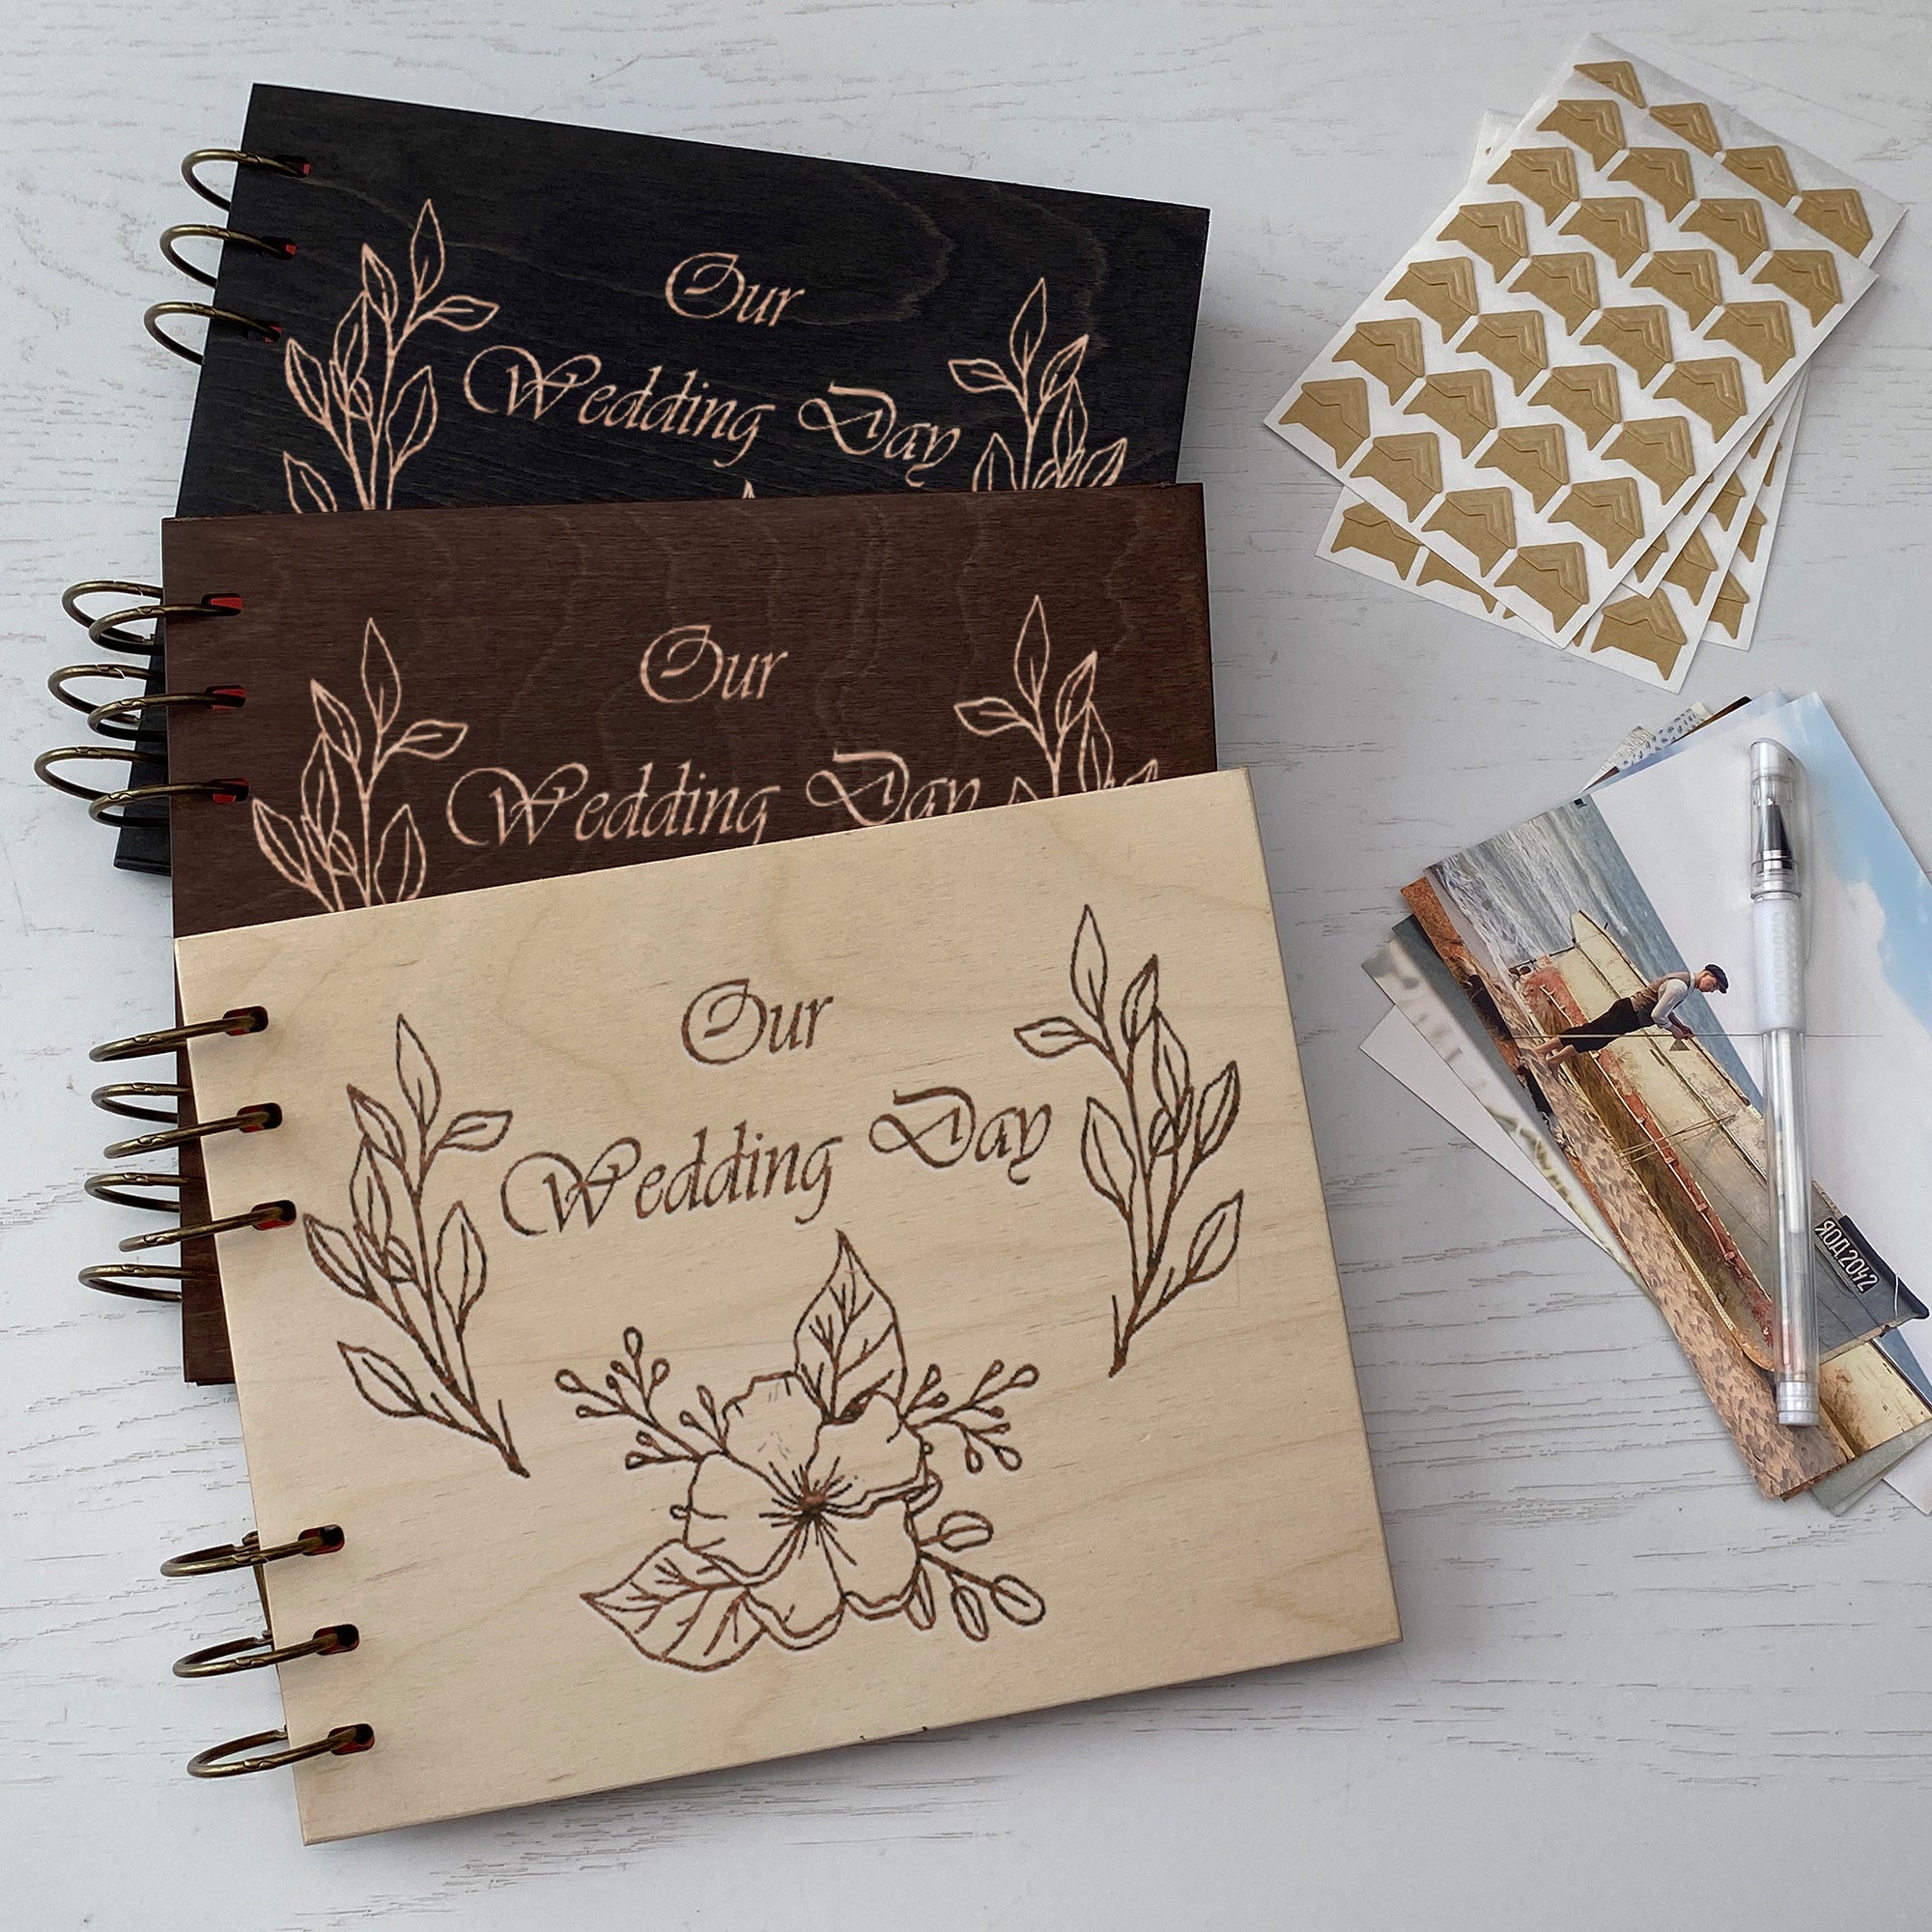 Personalized photo album cover and Wedding day map engraving